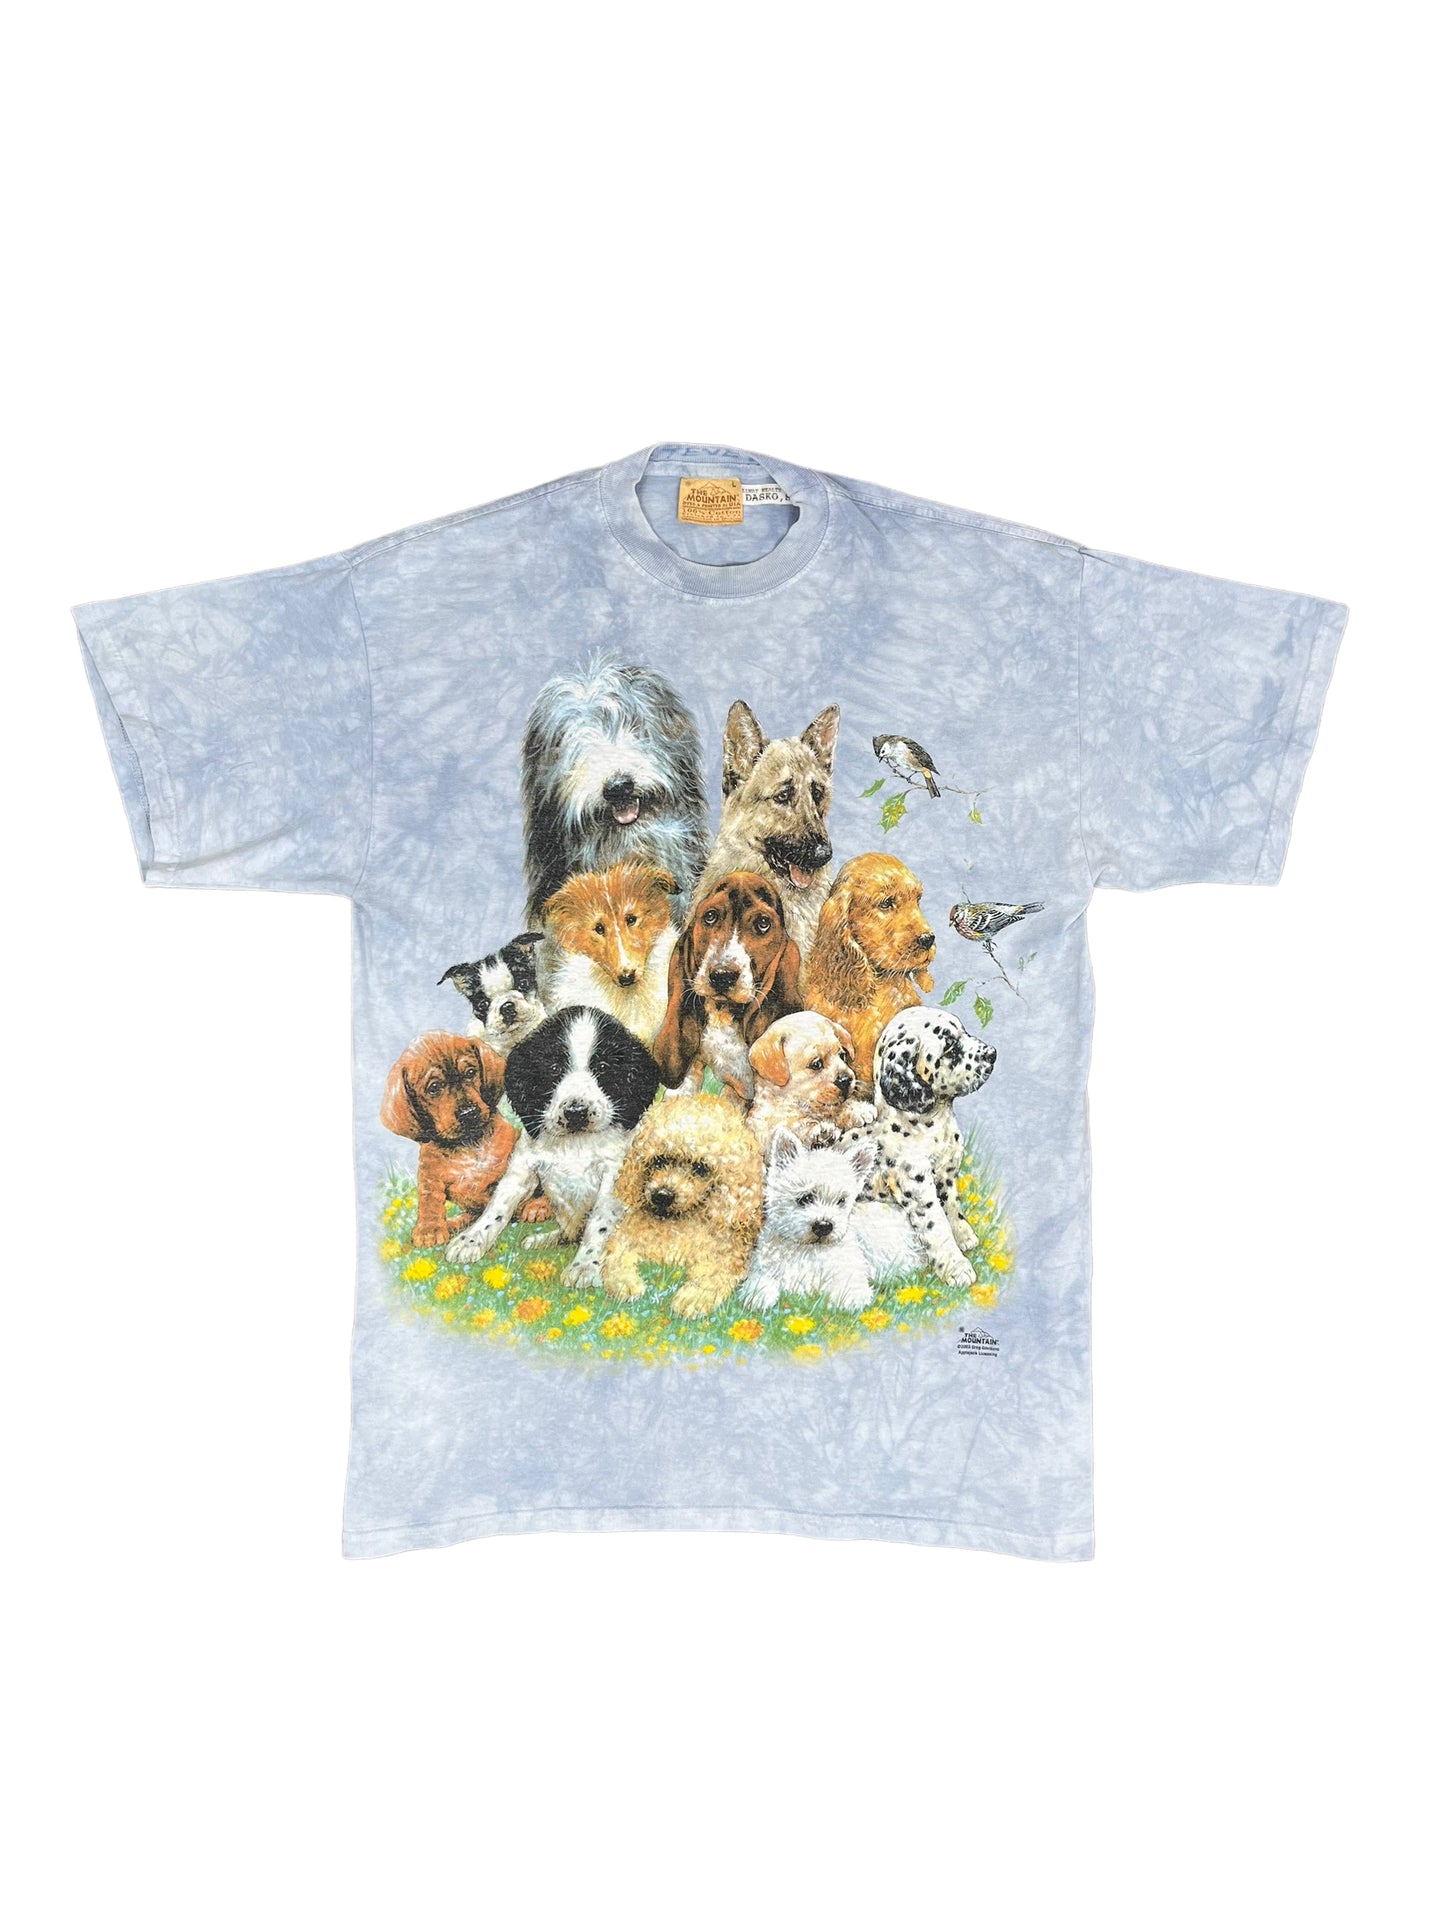 Vintage The Mountain Dogs T Shirt - Large